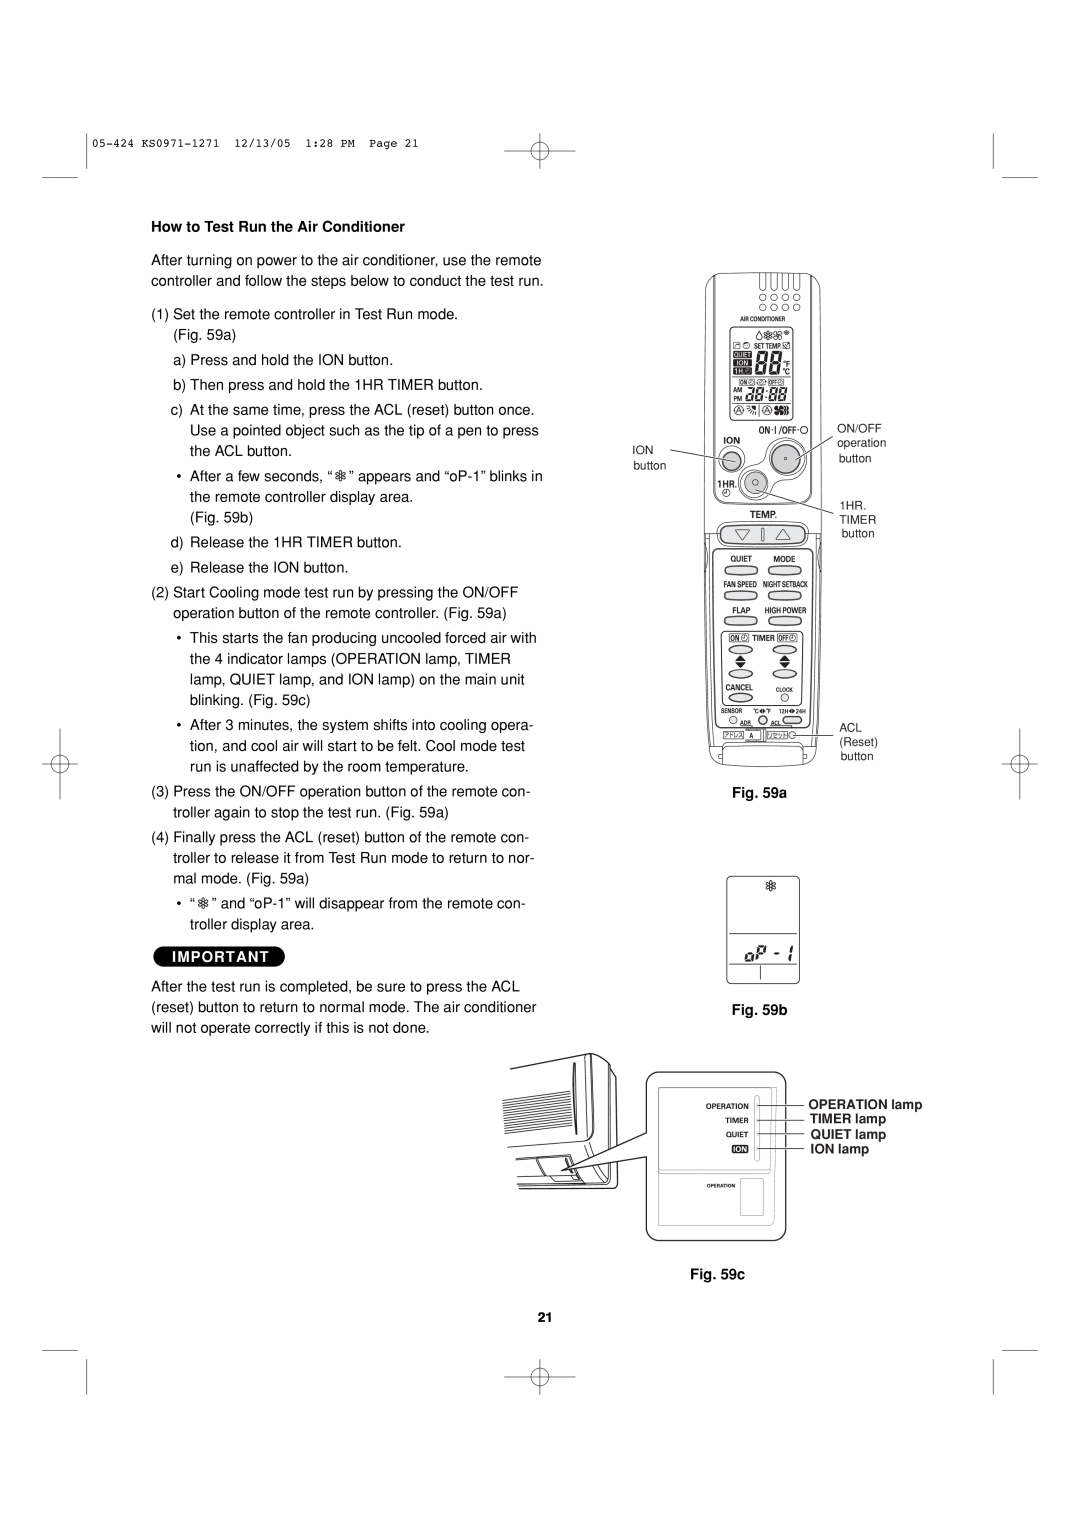 Sanyo Cool/Dry installation instructions How to Test Run the Air Conditioner, a b 